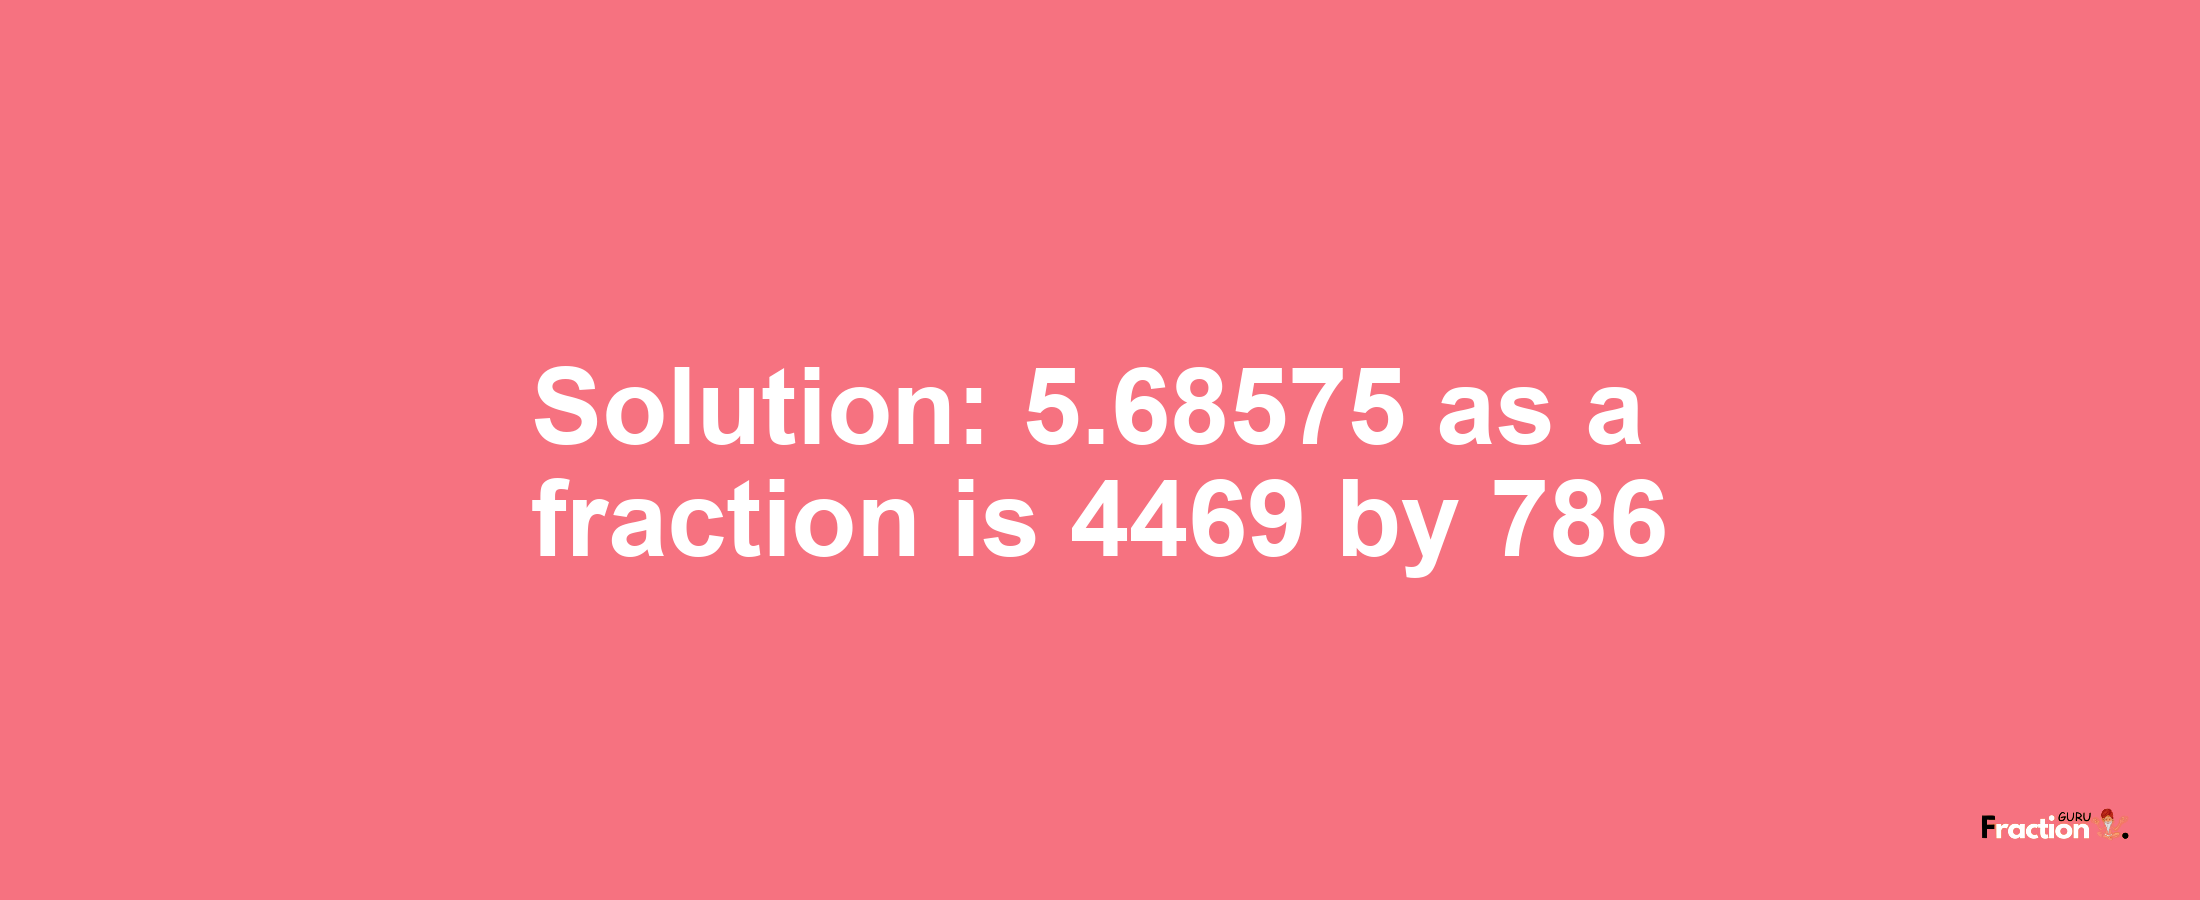 Solution:5.68575 as a fraction is 4469/786